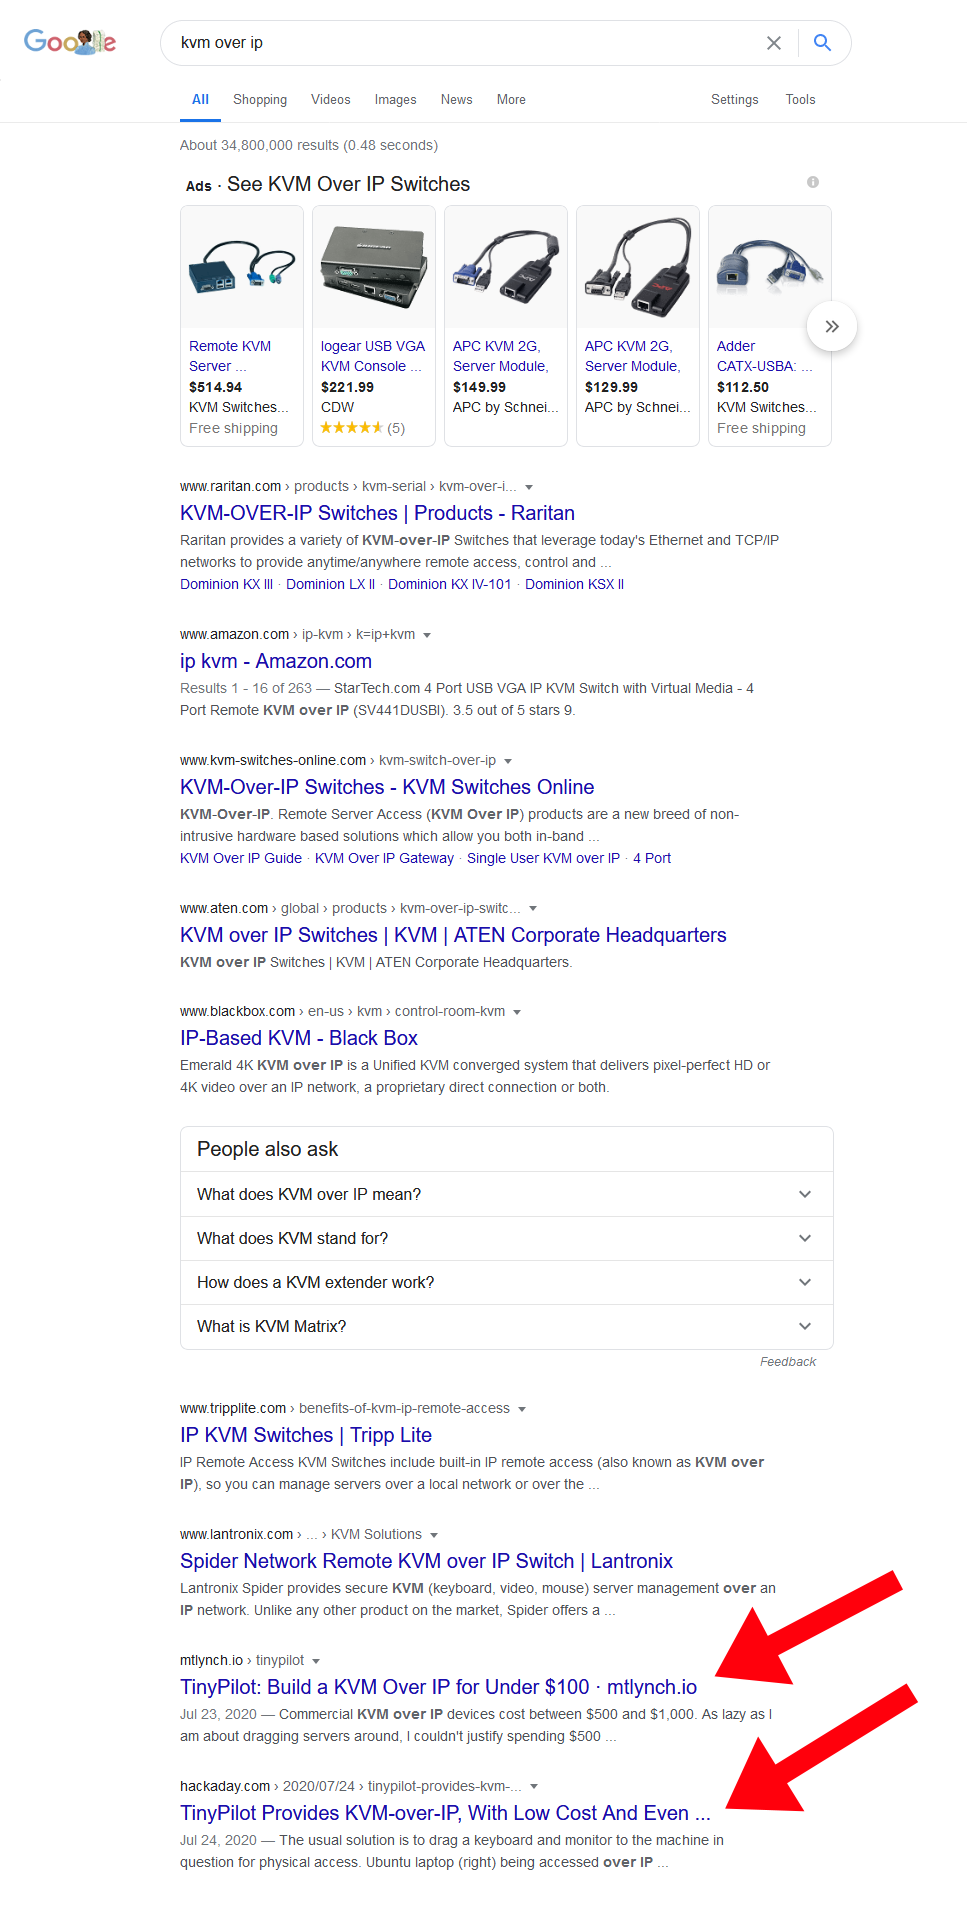 Screenshot of Google search results showing TinyPilot at the bottom of the first page of results